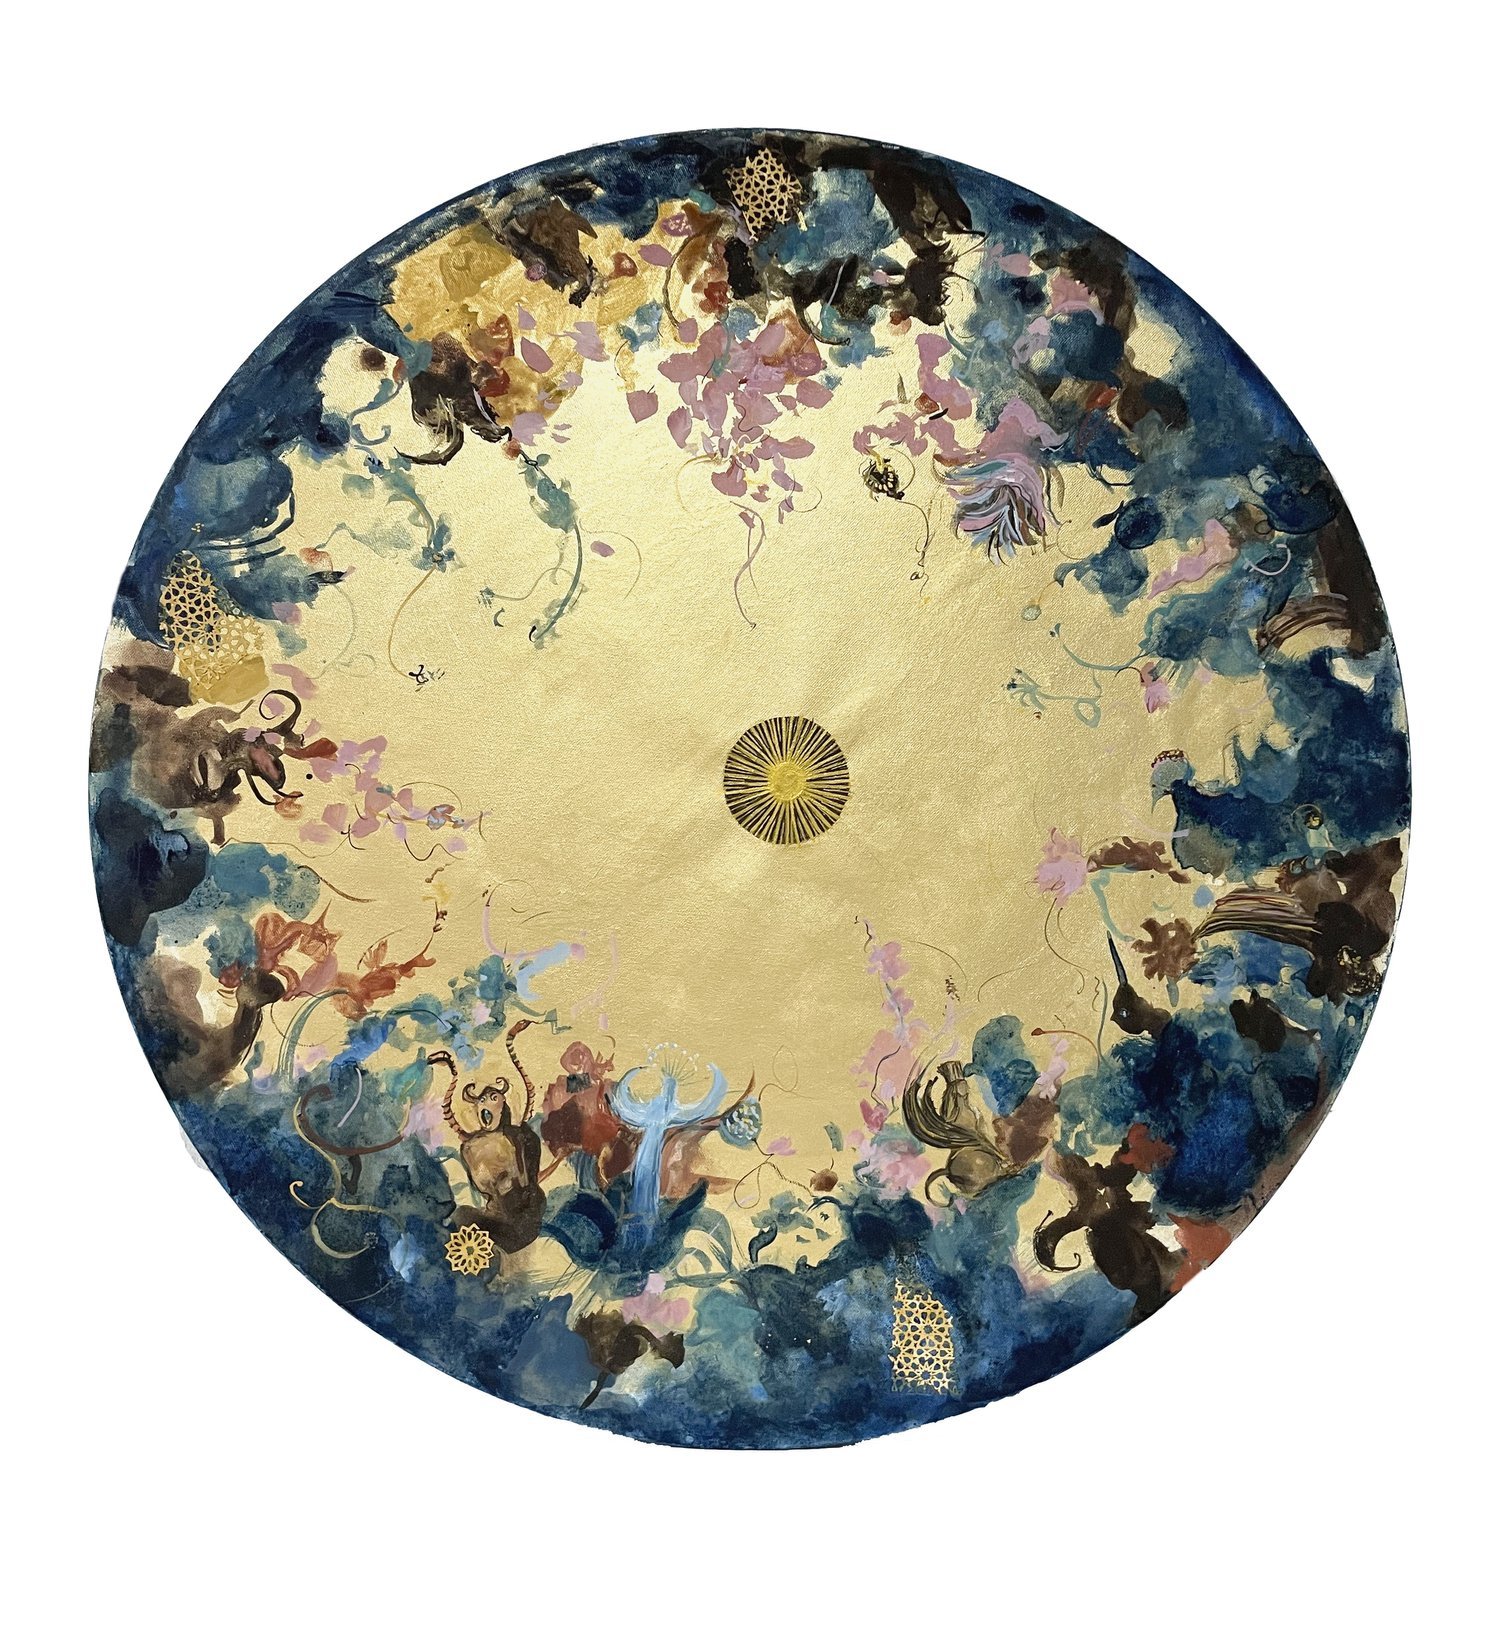   Anahita by Sayeh Behnam   30” diameter, Saffron threads, mica, minerals, and pigments,   Anahita is the ancient Persian goddess of fertility, water, health and healing, and wisdom. I created this piece strongly affected by all the fights and resist